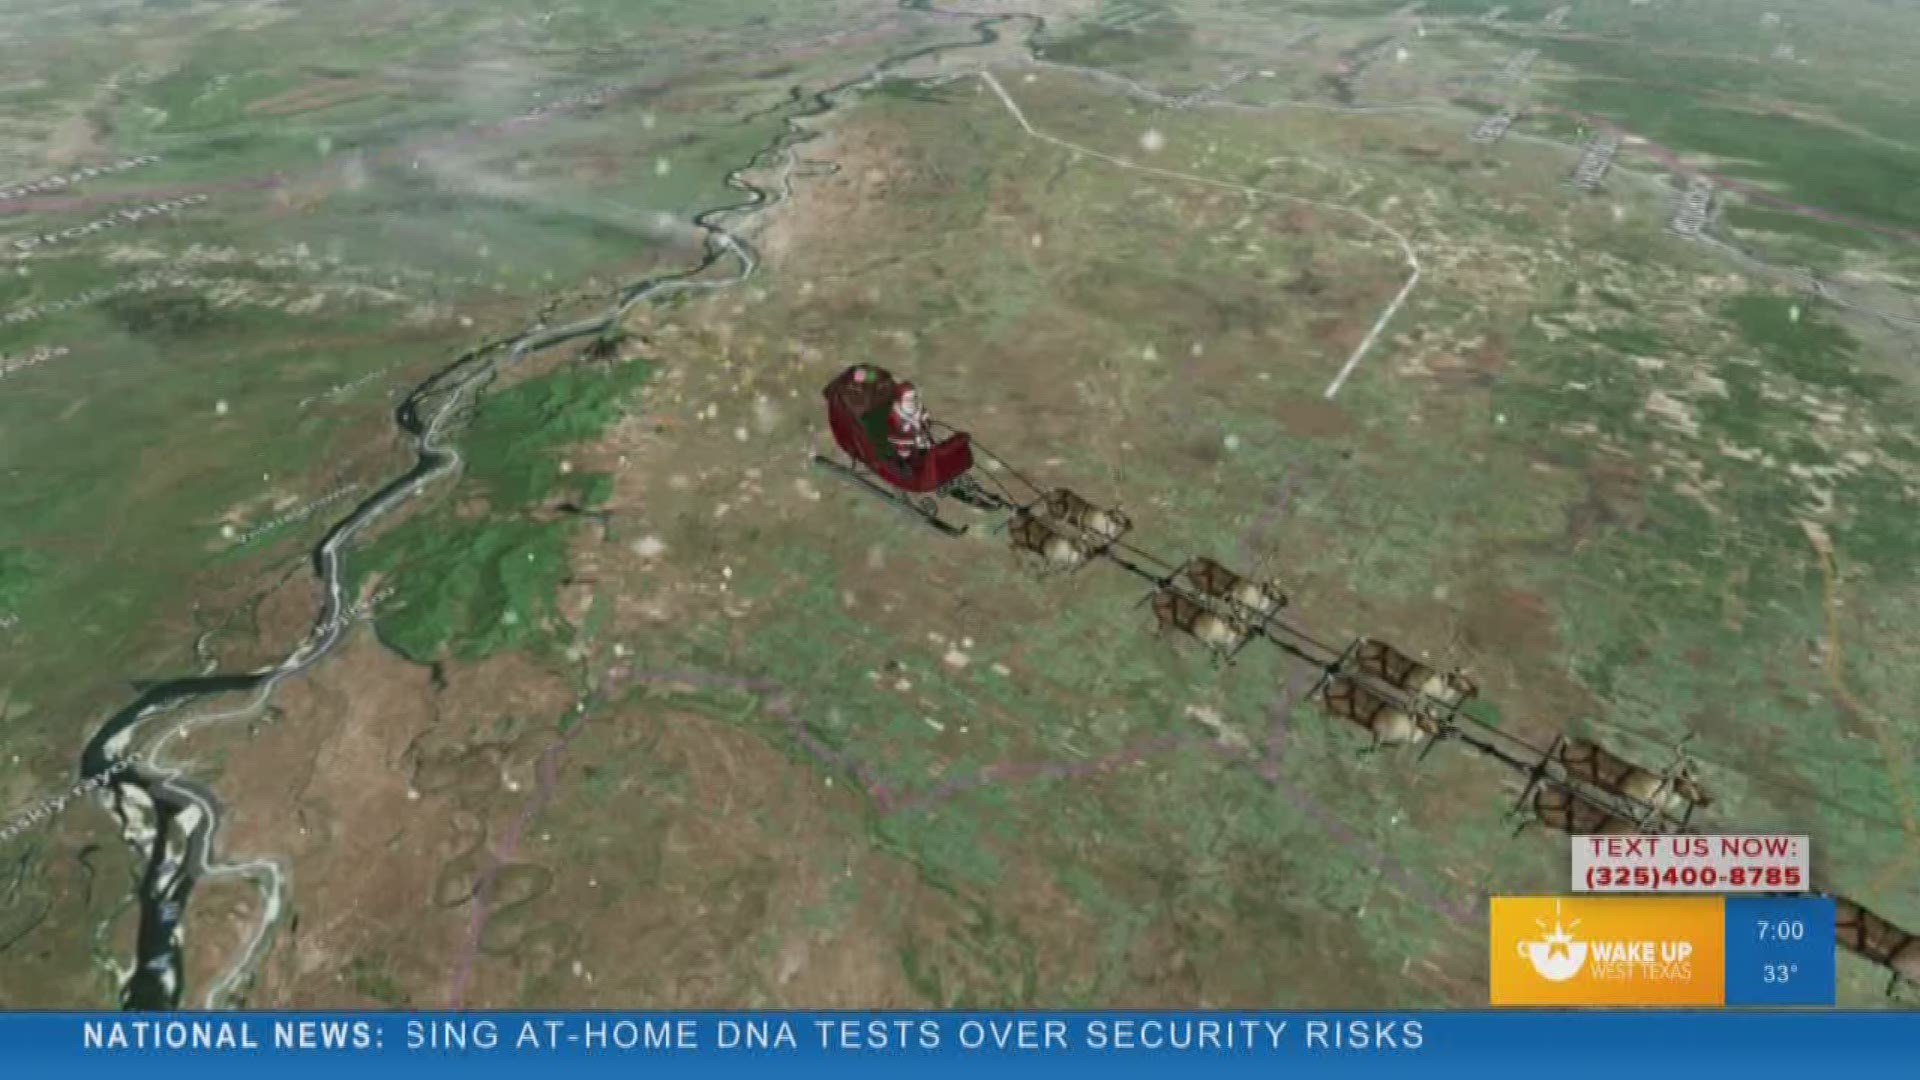 Camille Requiestas and Joe DeCarlo track Santa on this Christmas Eve as he begins his journey around the world.